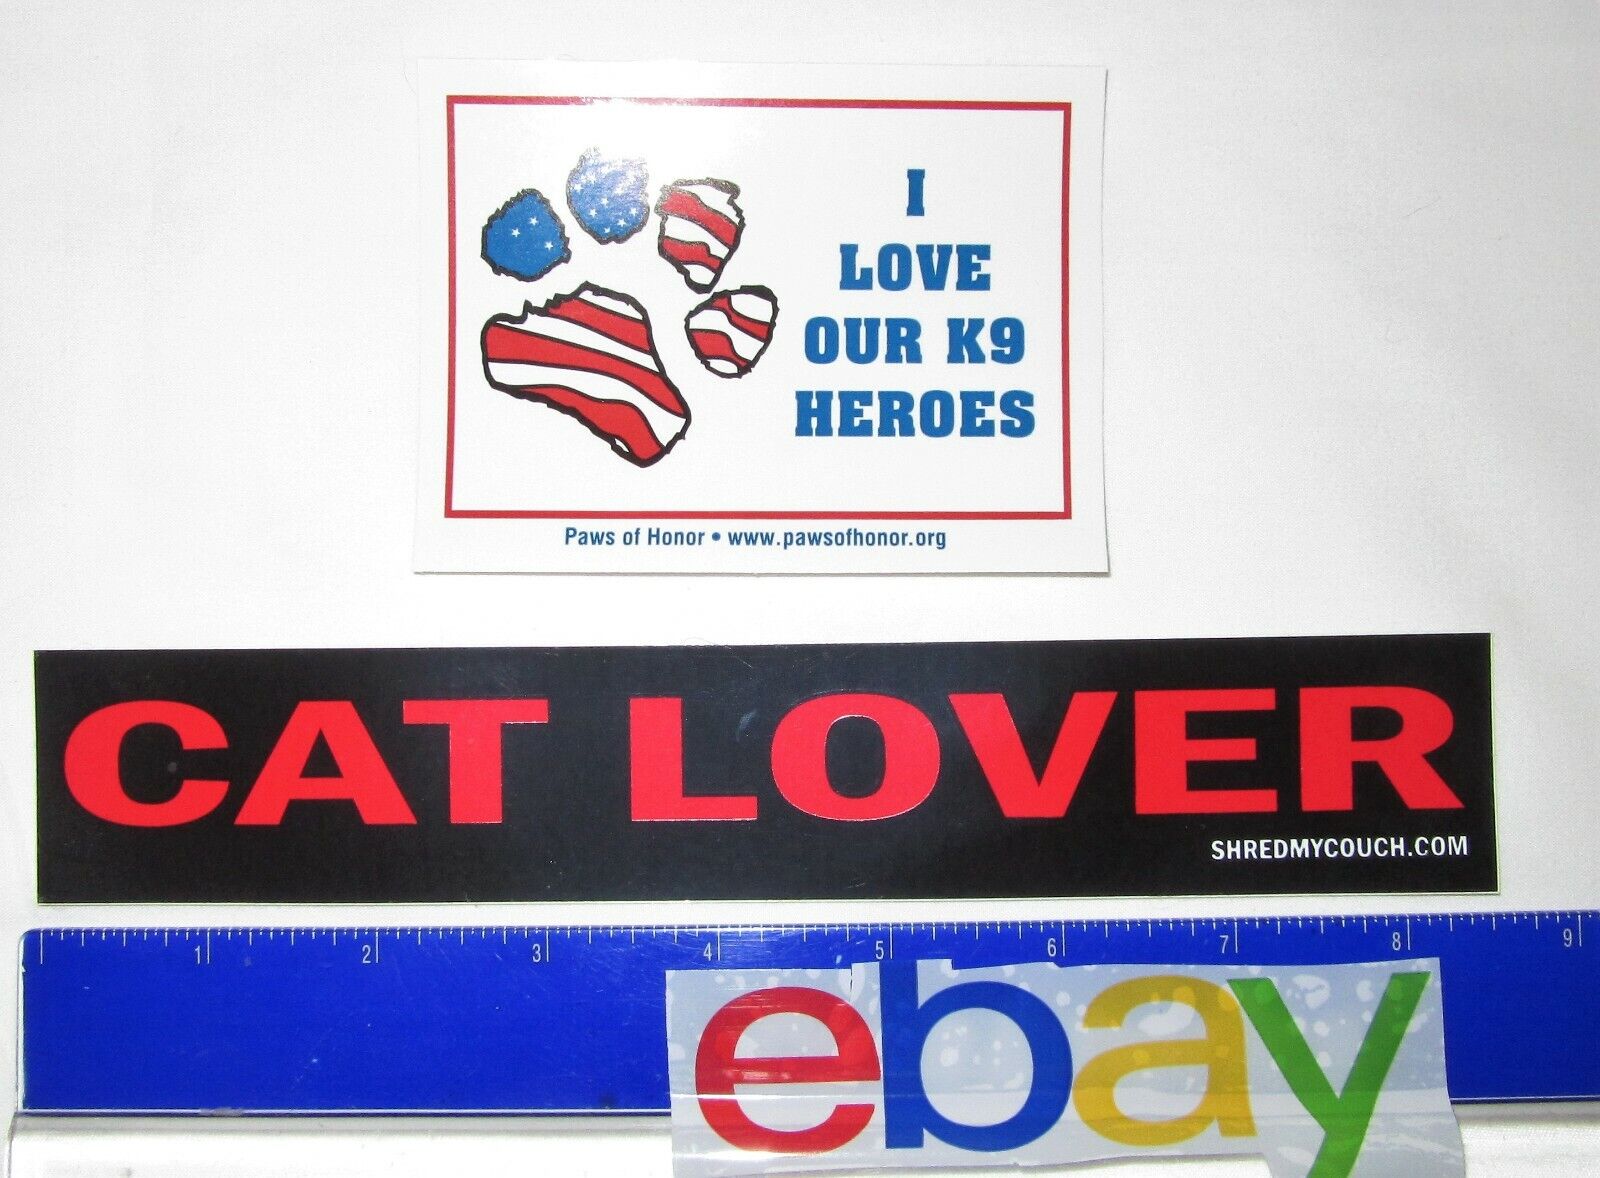 Cat Lover & K9 Heroes sticker pair new unused FREE SHIPPING in the US Shredmycouch - фотография #2